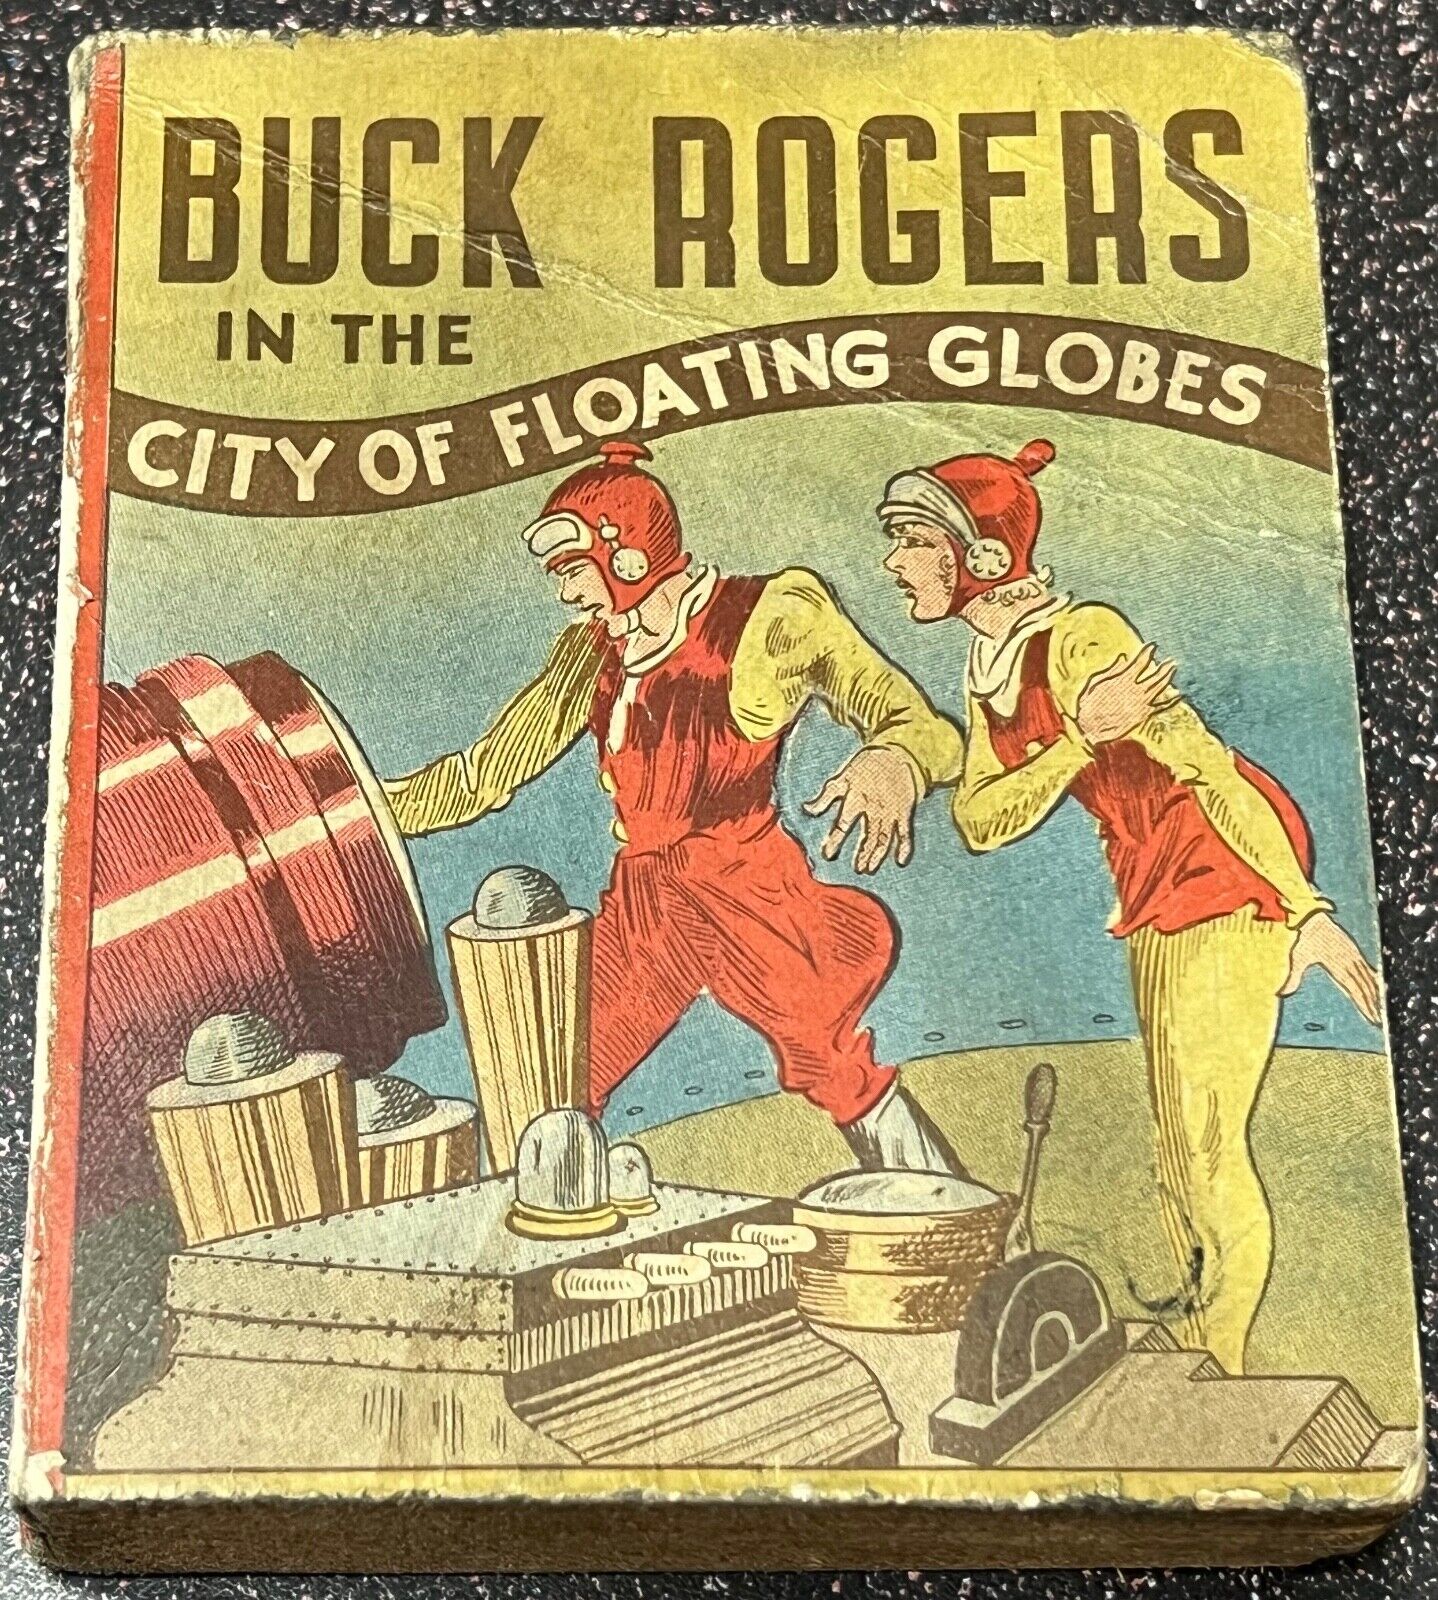 BLB Buck Rogers in the City of Floating Globes (Whitman, 1935) Cocomalt Premium